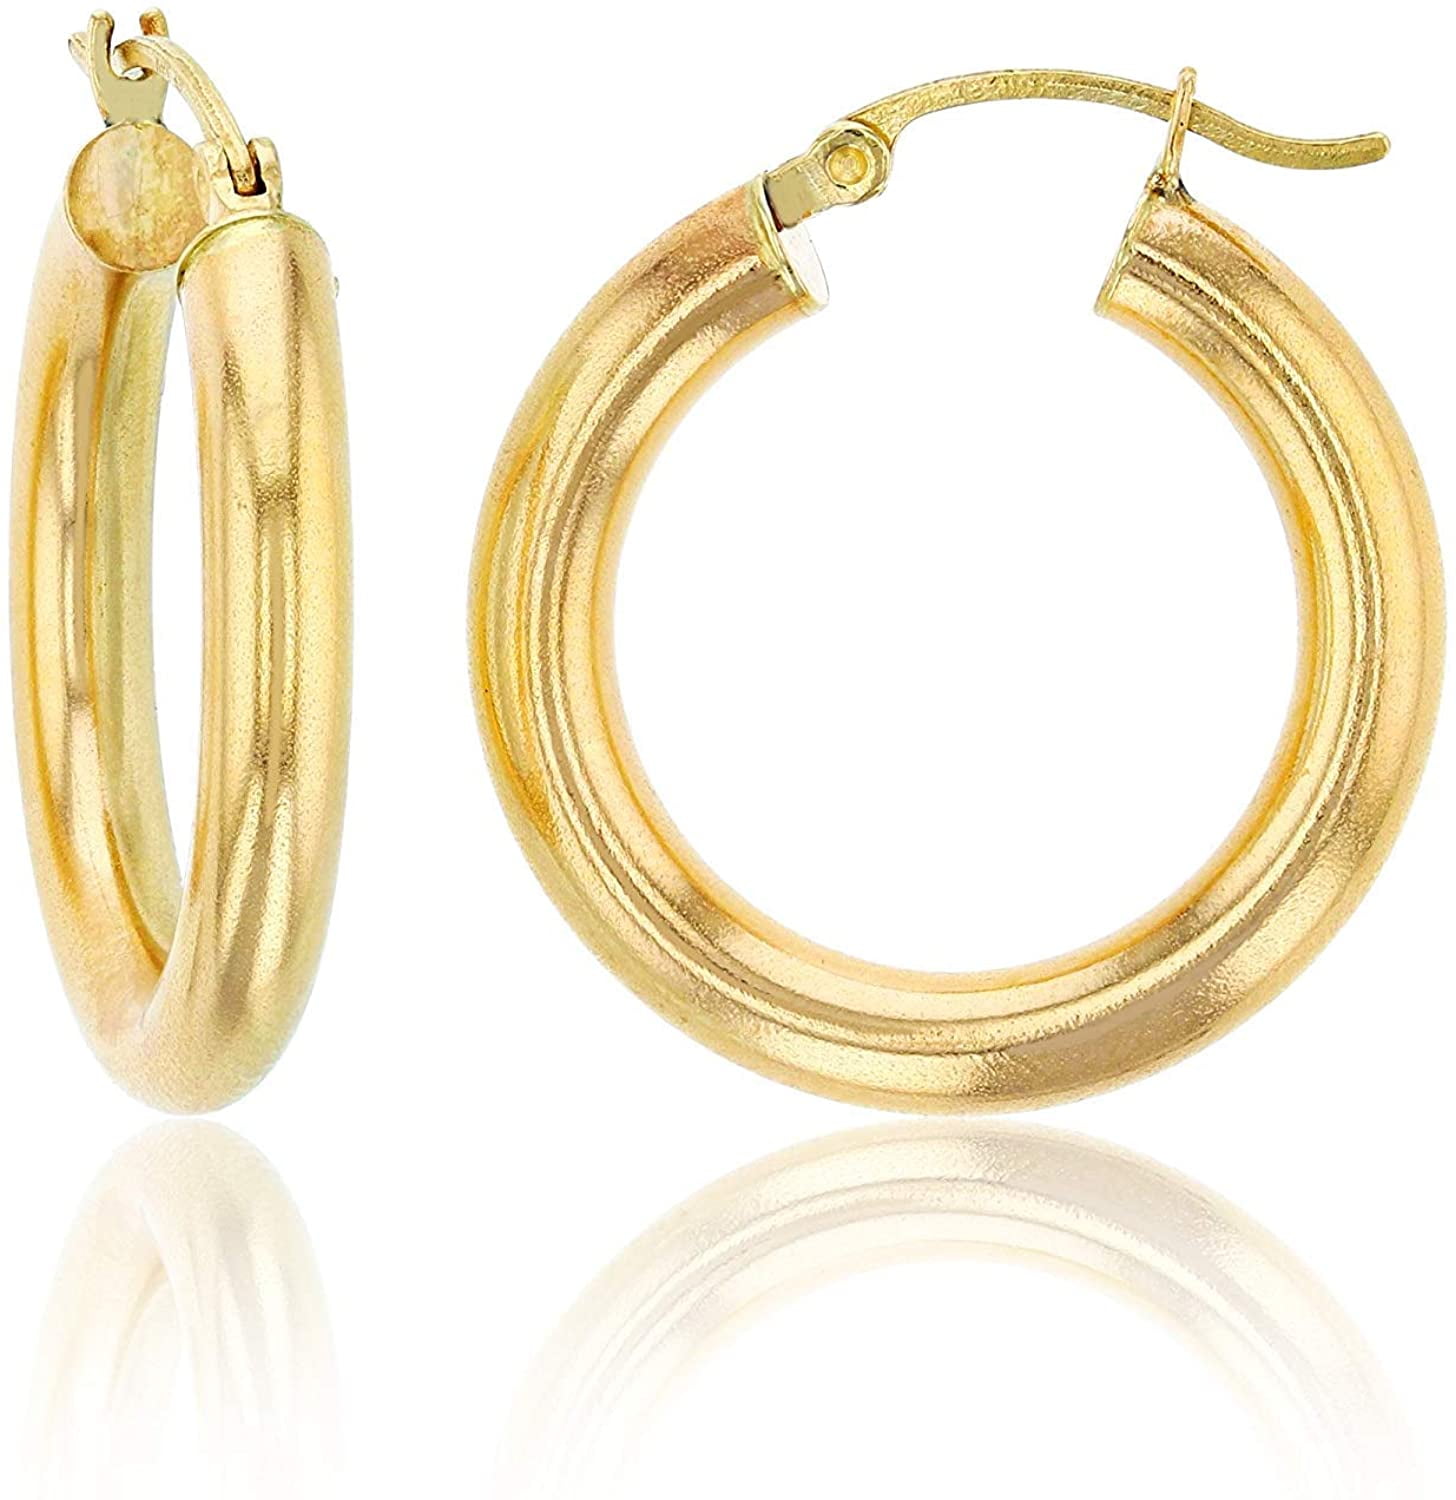 14K Yellow Gold 4 MM Twisted Tubes Circles Hoop Earrings MSRP $307